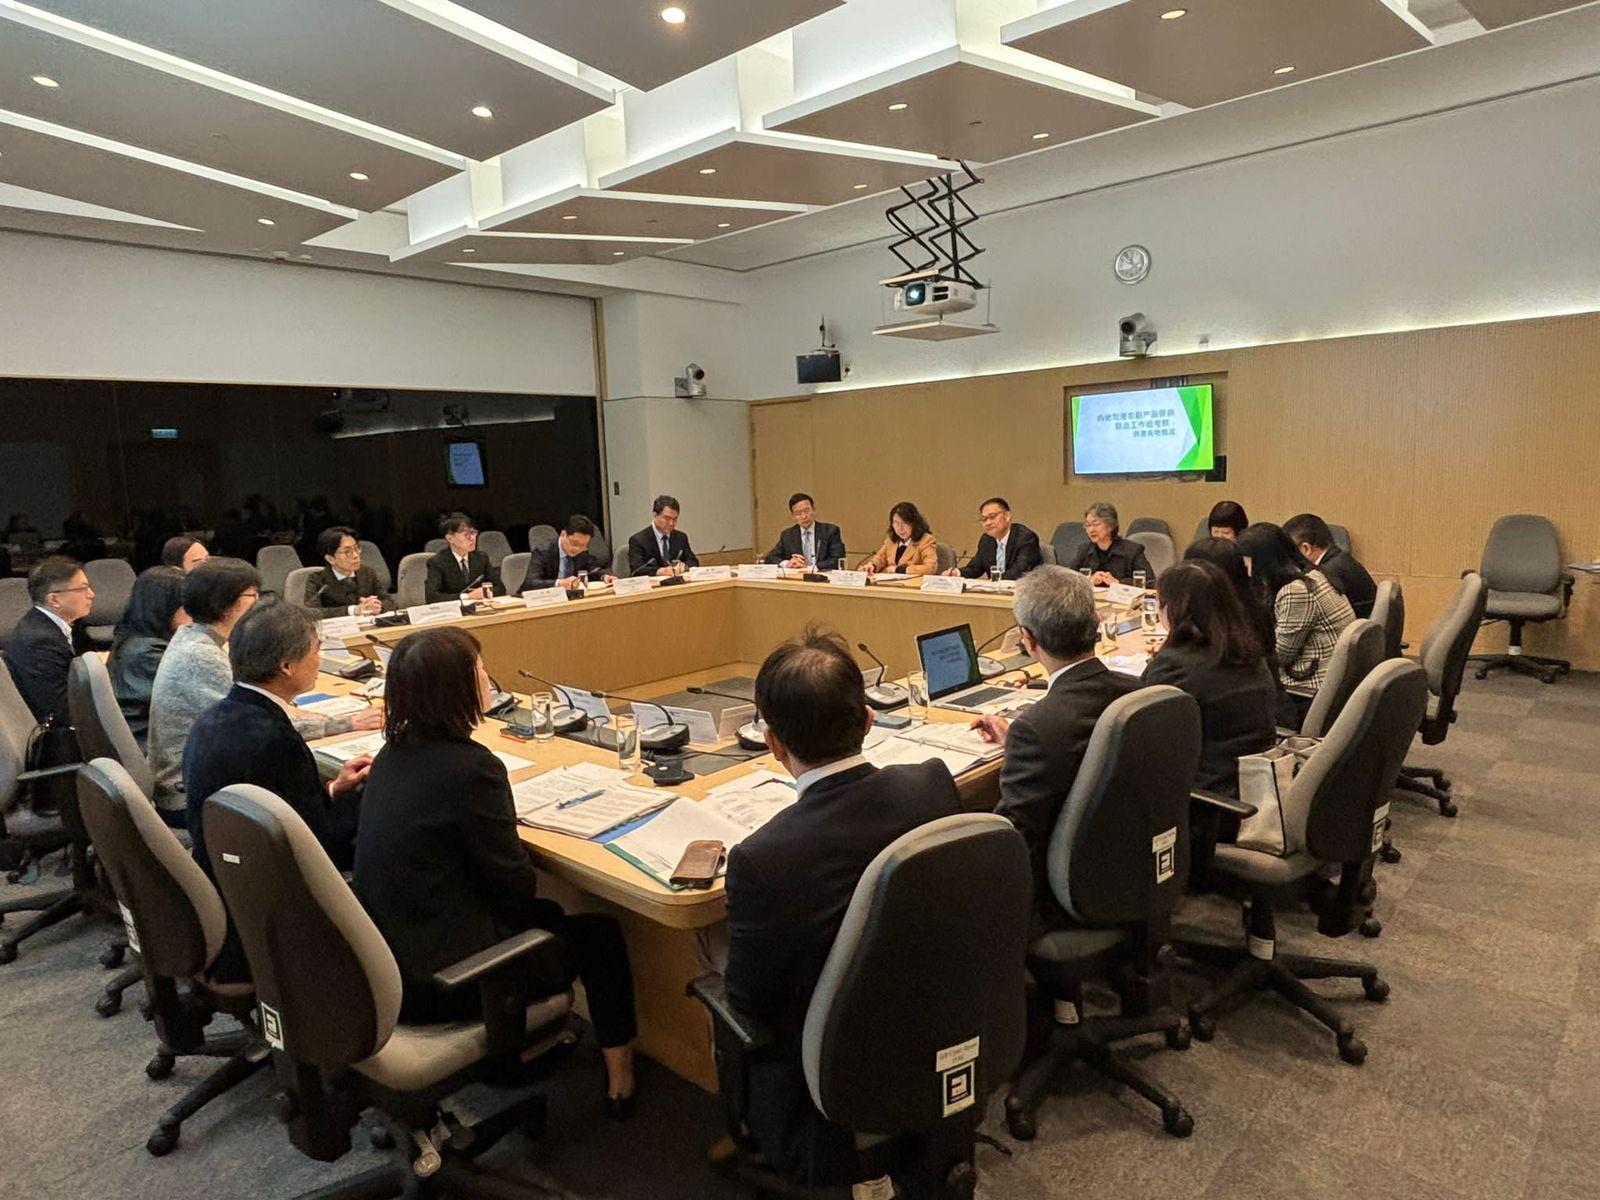 A Mainland delegation, which was tasked to ensure stable supply and safety of agricultural products to Hong Kong during the Chinese New Year, met with officials from the Government of the Hong Kong Special Administrative Region today (January 30) to exchange views on the supply and safety of food to Hong Kong.